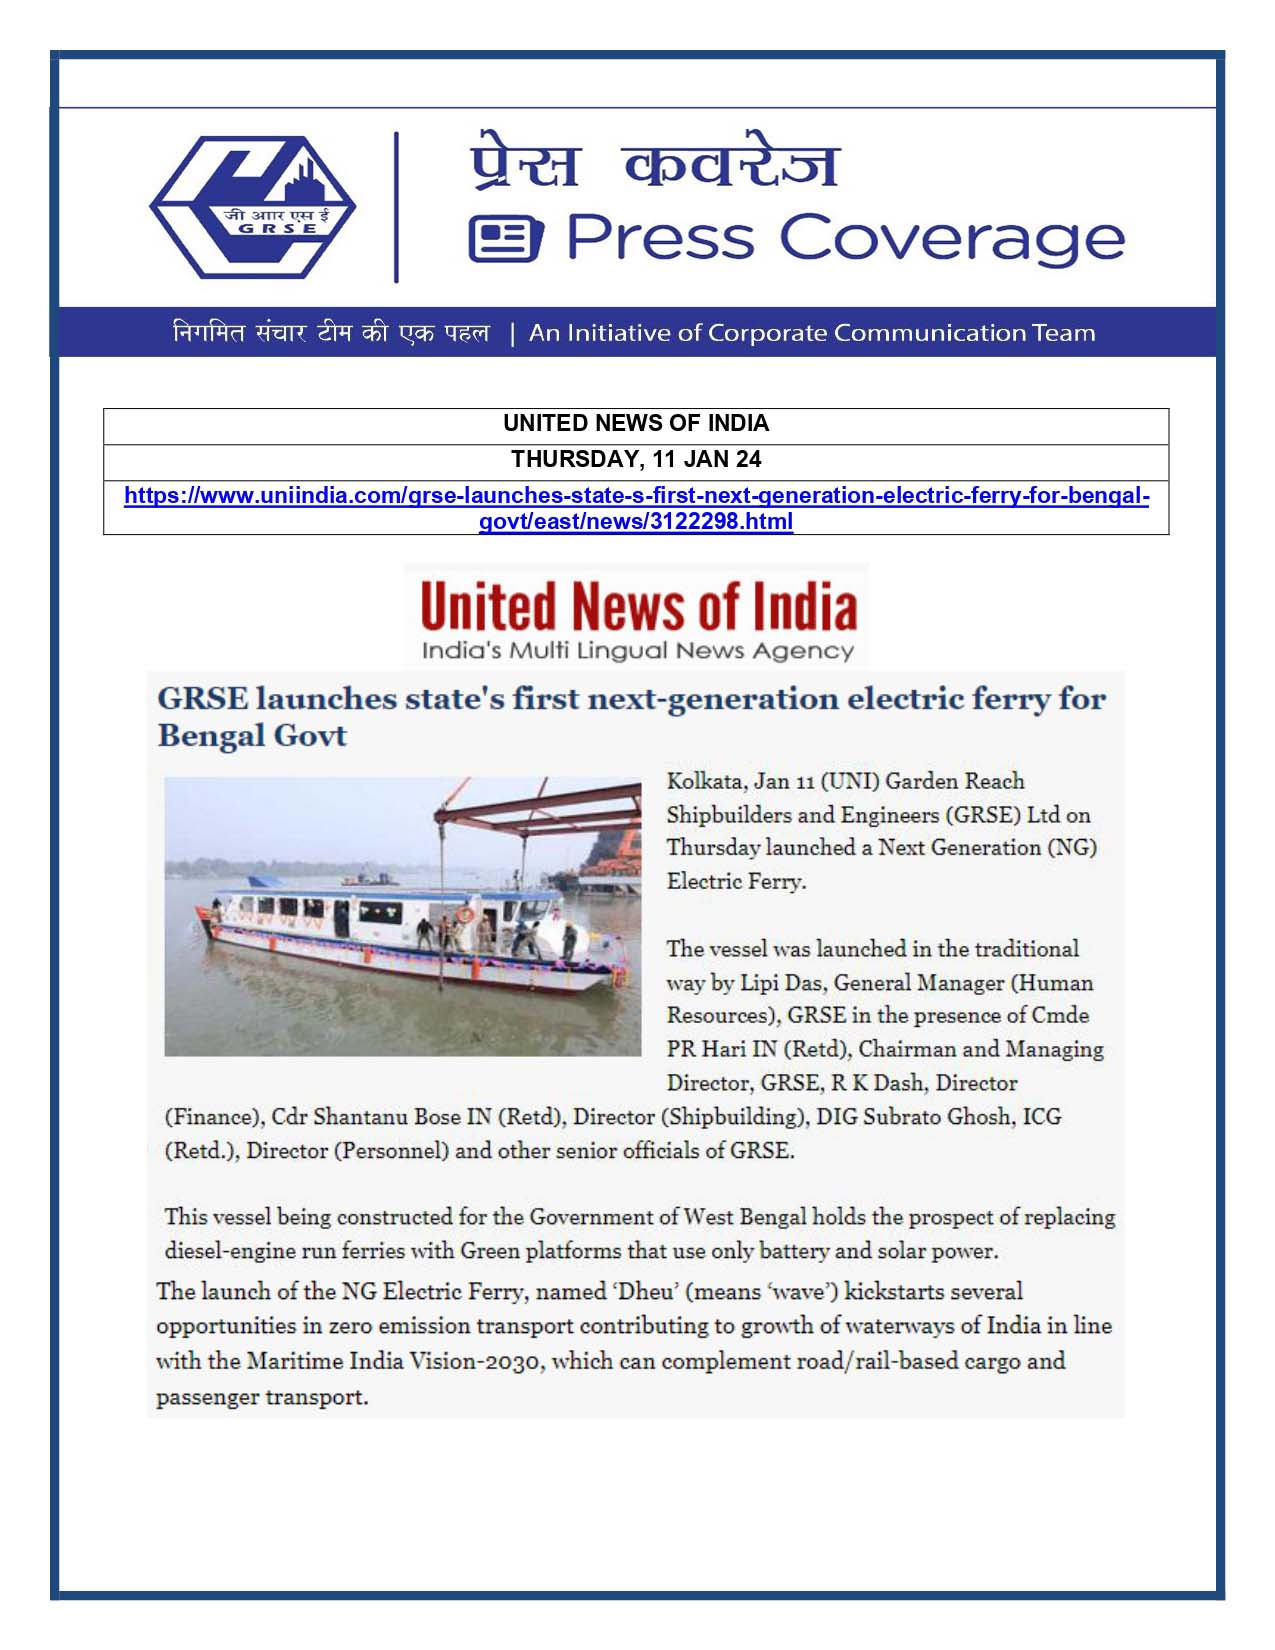 Press Coverage : United News of India, 11 Jan 24 : GRSE launches states first next-generation electric ferry for Bengal Govt